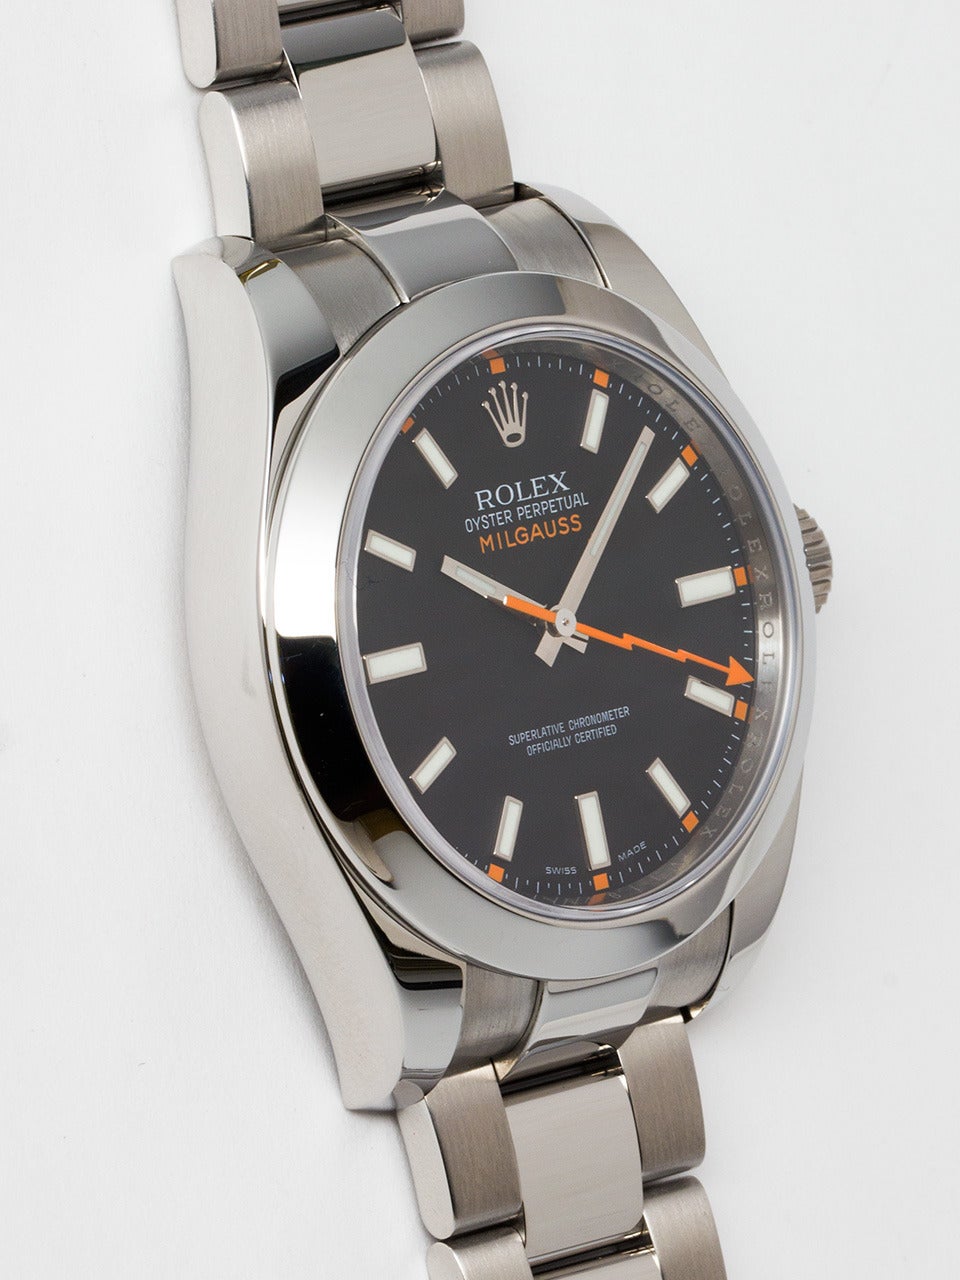 Rolex Stainless Steel Milgauss Wristwatch ref # 116400 serial #V1 circa 2008. 40mm diameter Oyster case with wide smooth bezel and sapphire crystal. Gloss black dial with super luminova bright glow indexes and hands, orange lighting bolt sweep